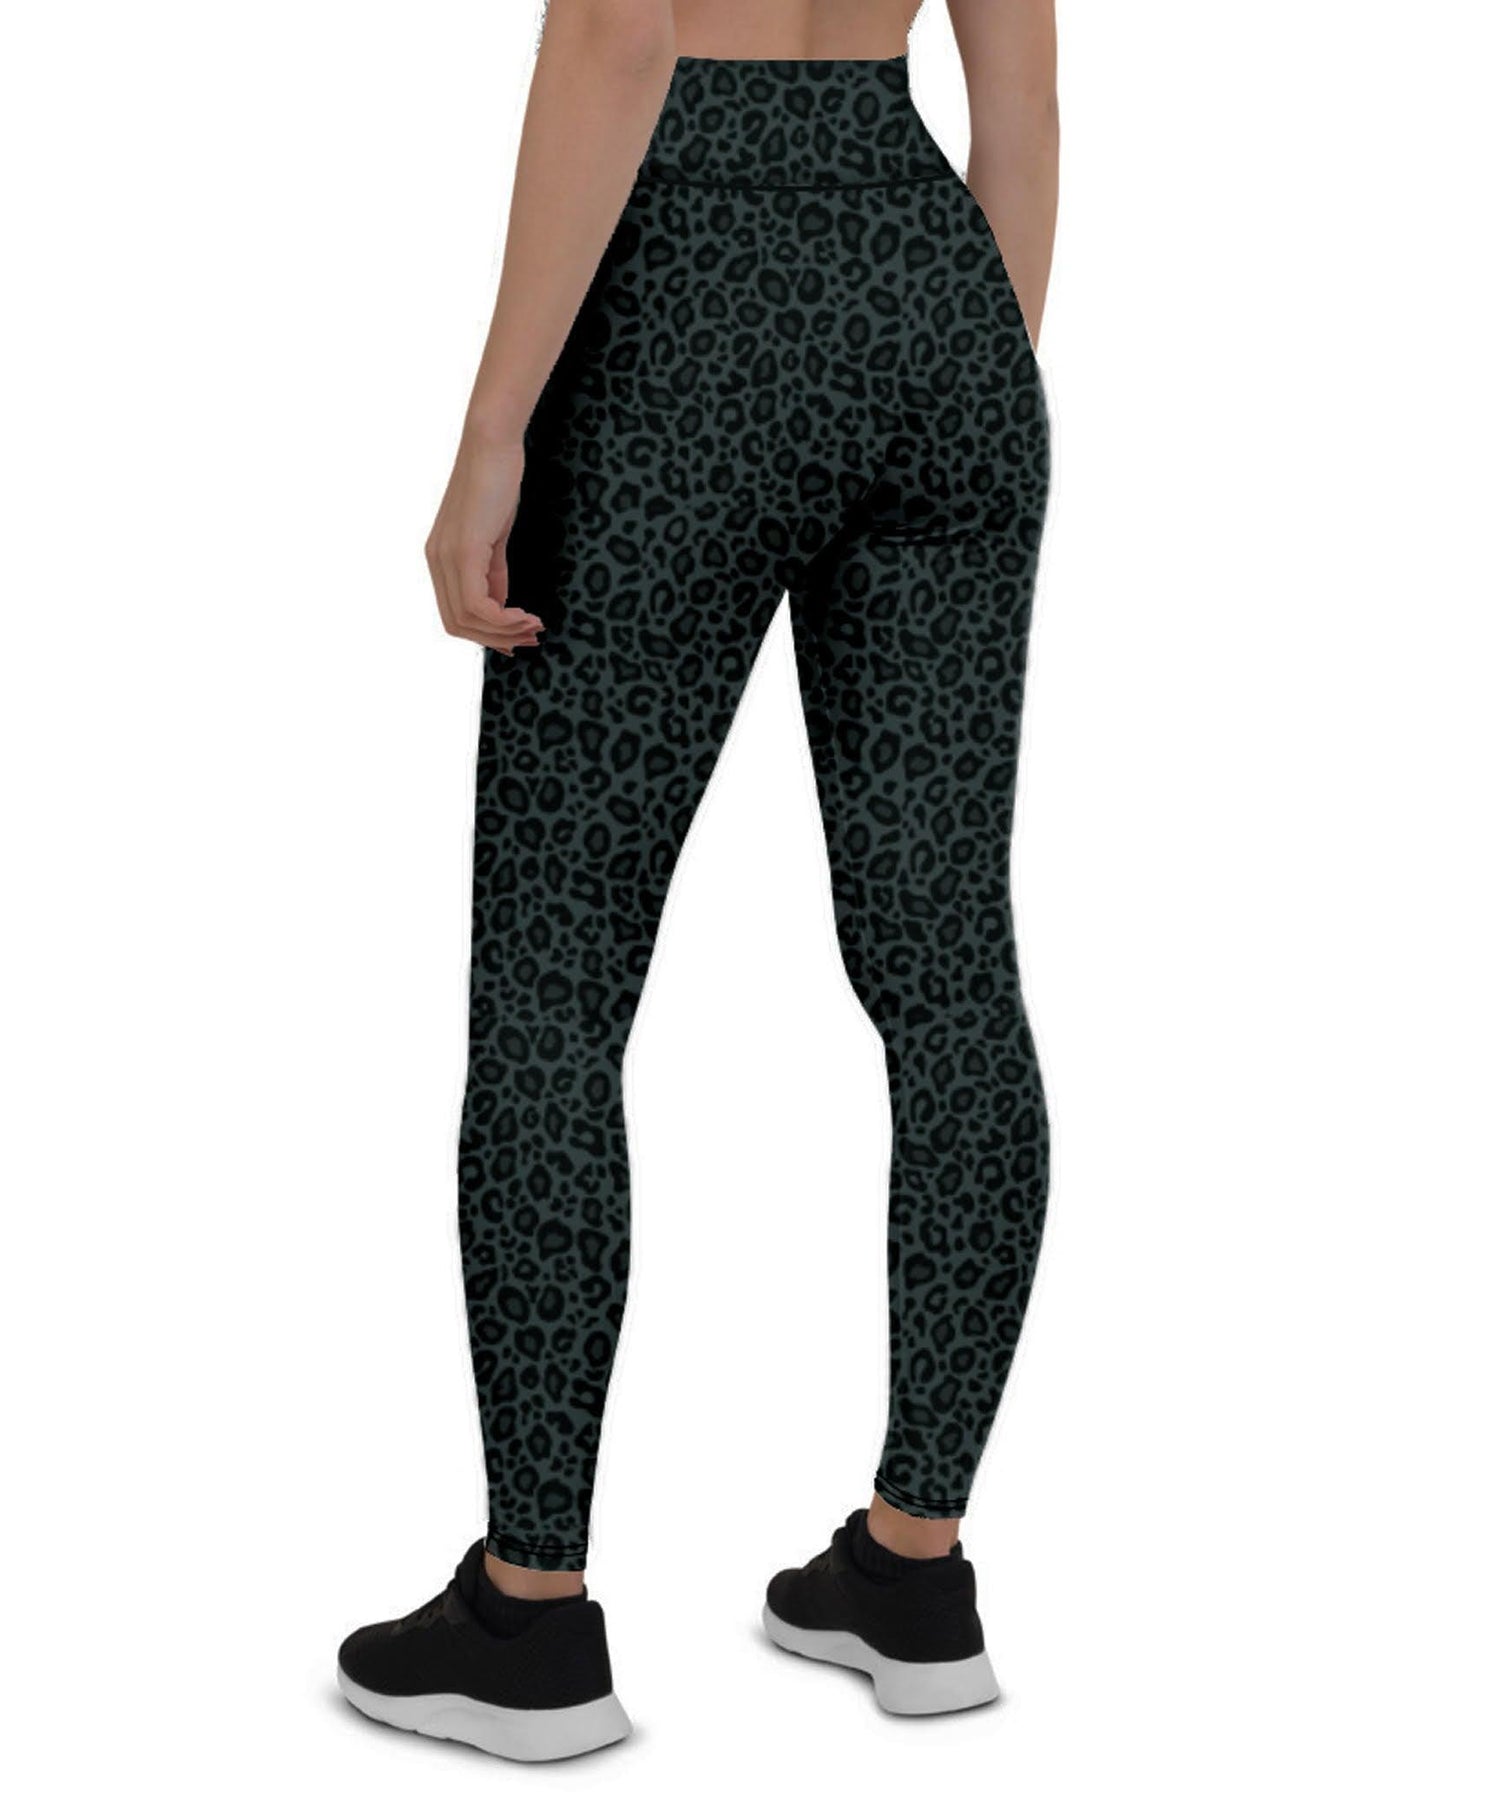 Mystery Blue Camo Gymx Leggings - Sale at Rs 799.00